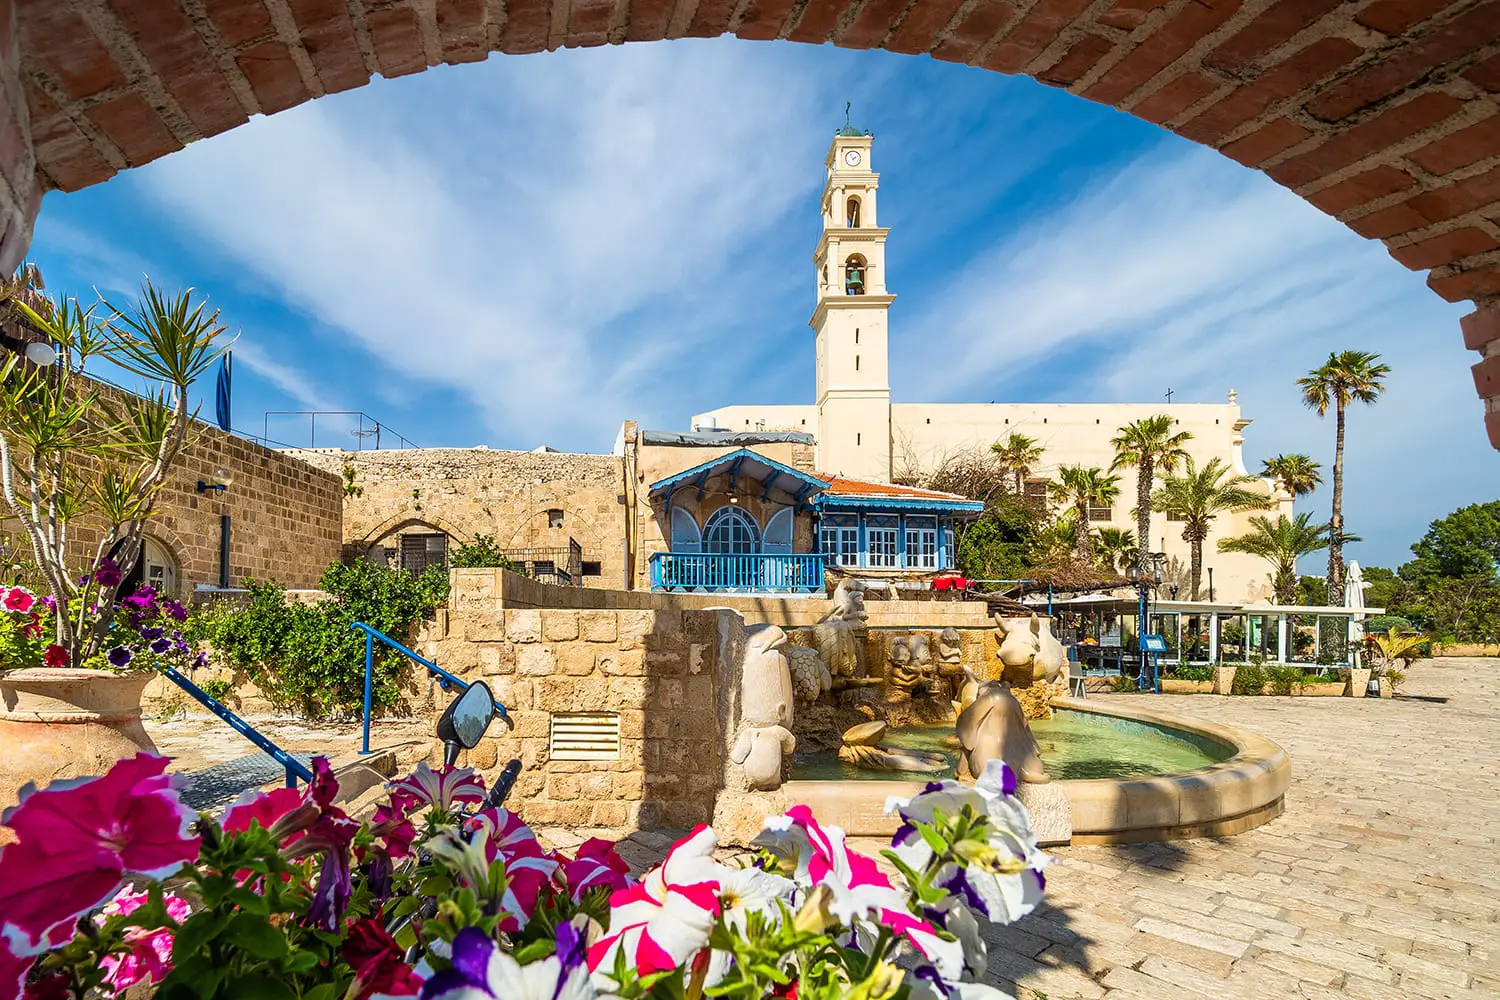 View of Kedumim Square with St. Peter's church in old Jaffa, Tel Aviv, Israel